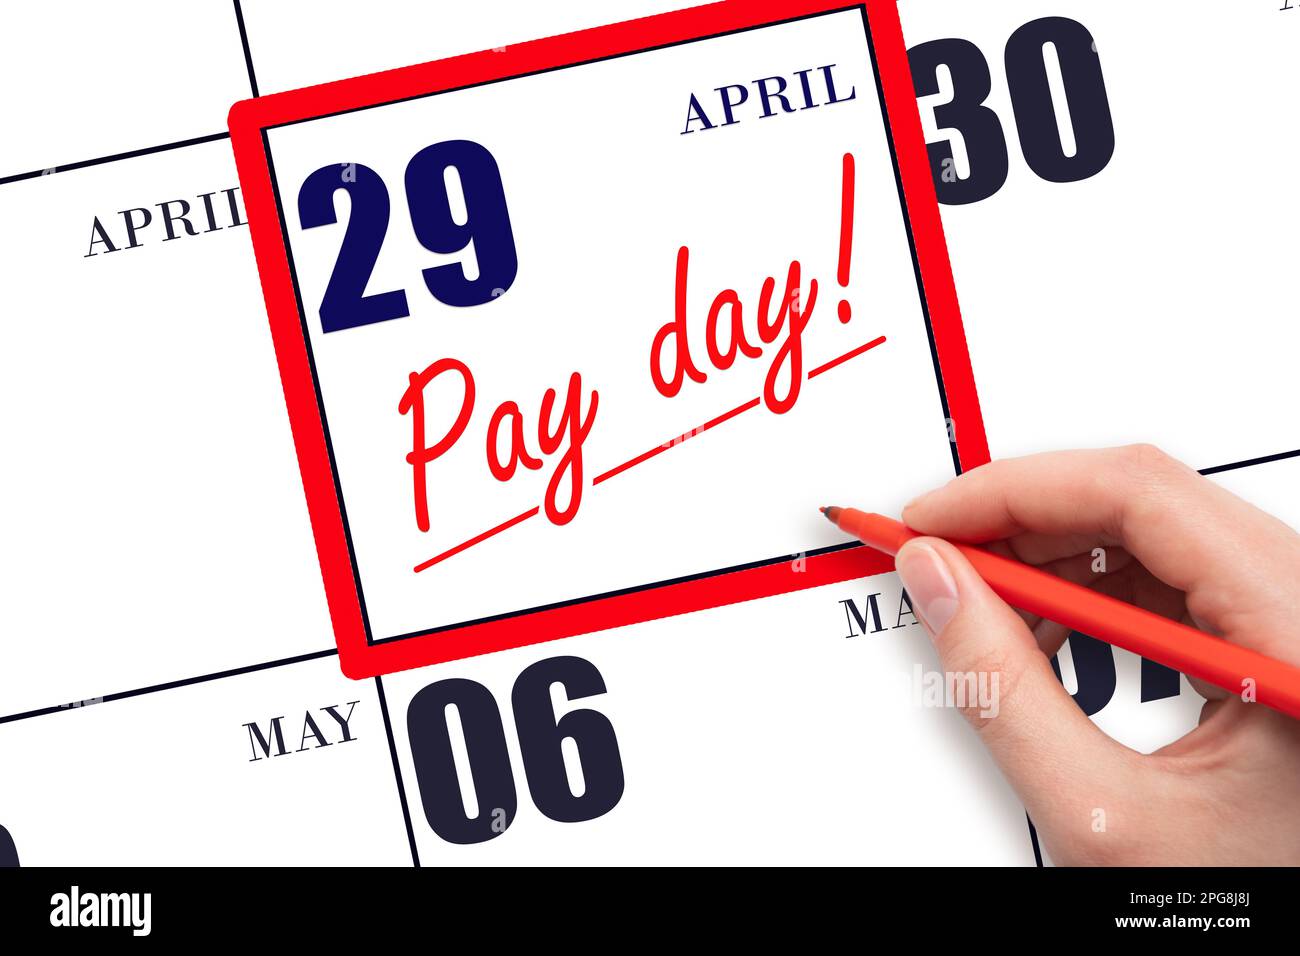 29th day of April. Hand writing text PAY DATE on calendar date April 29 and underline it. Payment due date. Reminder concept of payment. Spring month, Stock Photo